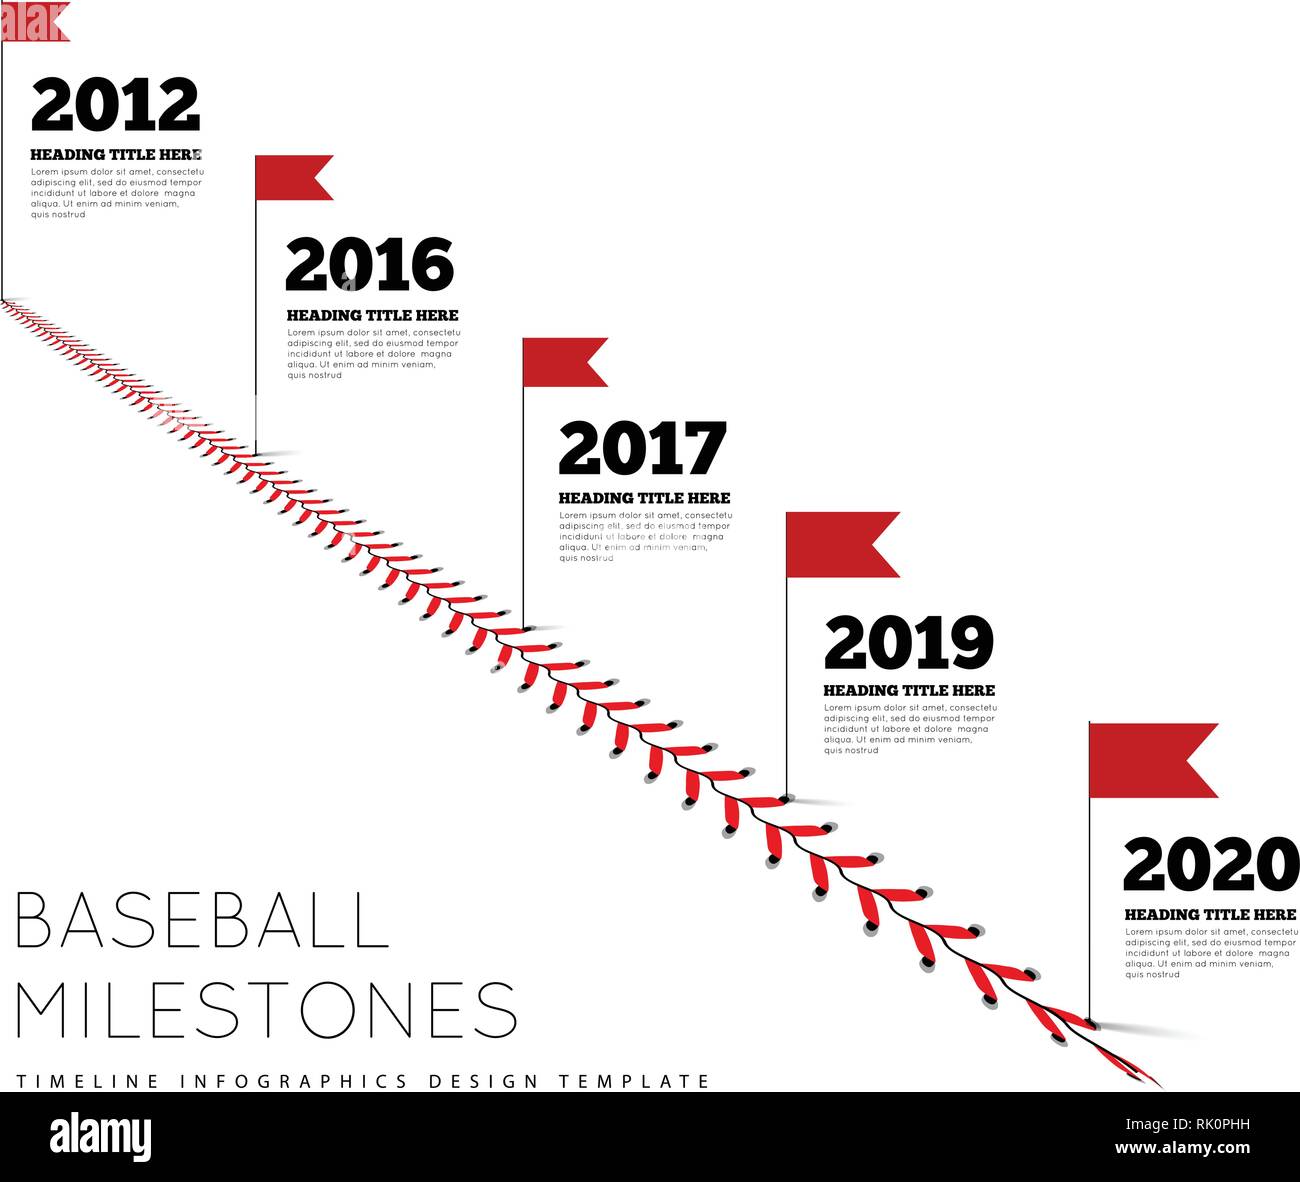 Timeline infographics for baseball. Milestones of development. Lace from a baseball on a white background Stock Vector